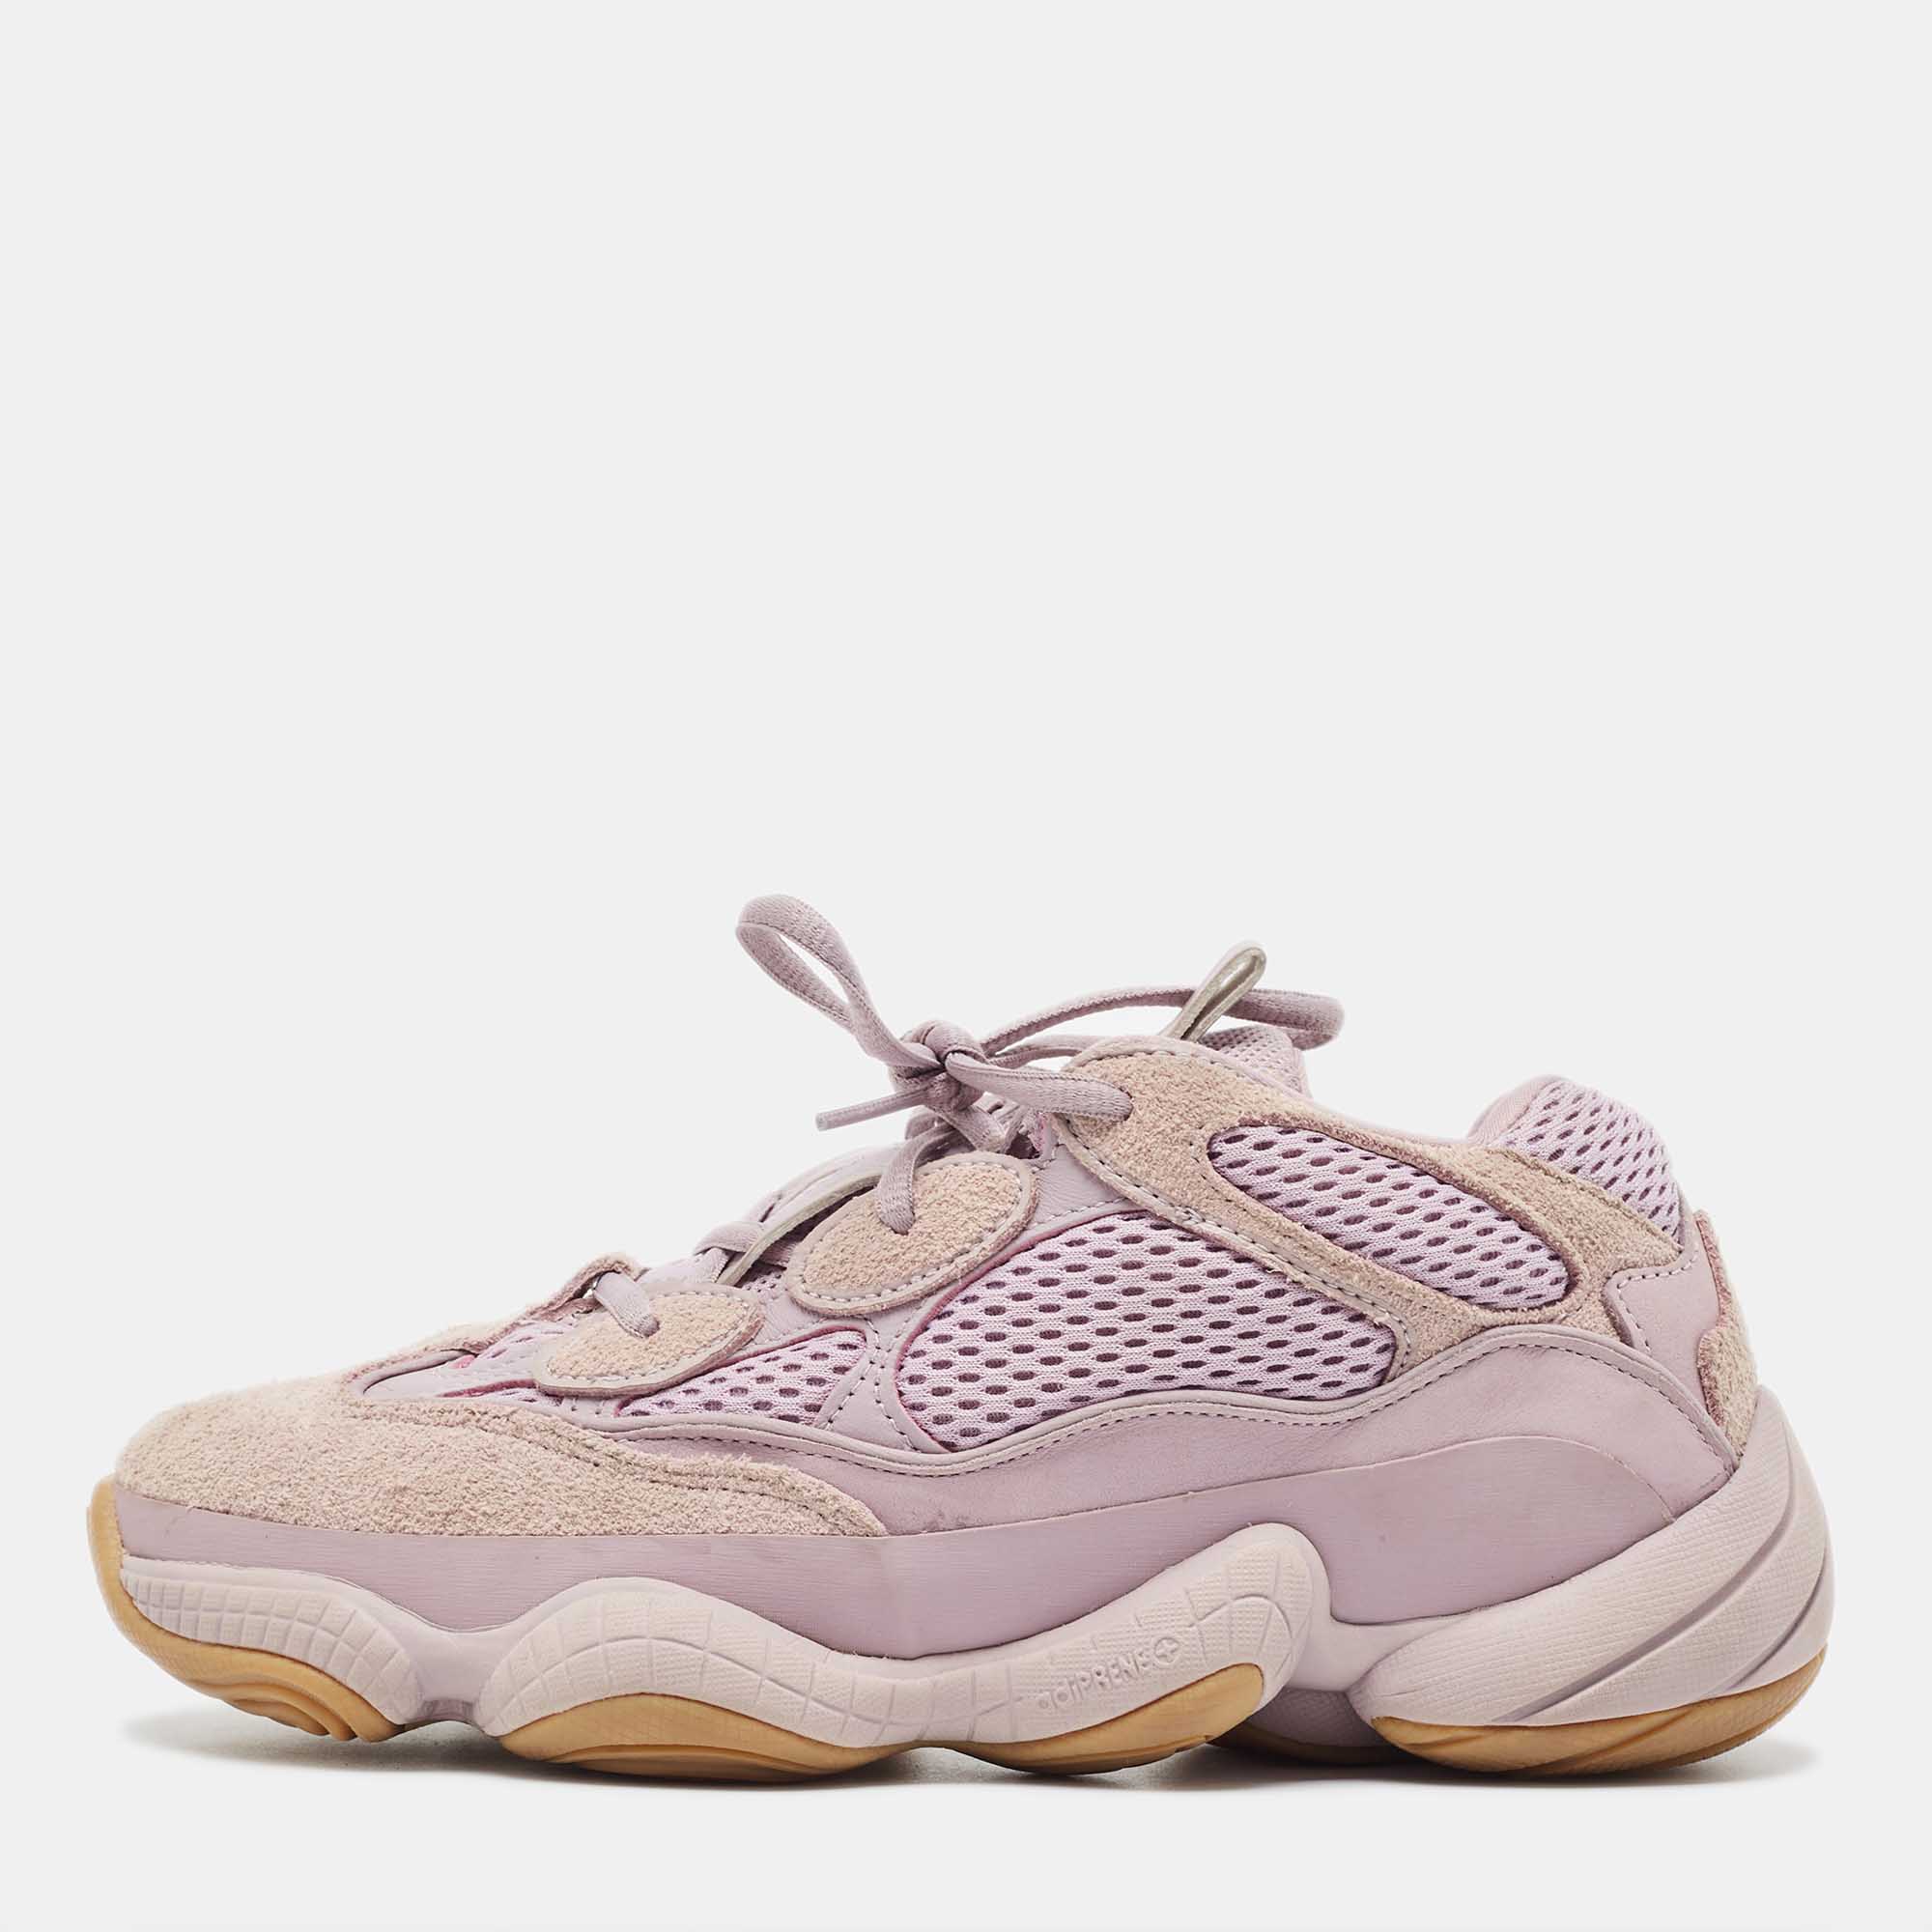 Pre-owned Yeezy X Adidas Adidas X Yeezy Purple Mesh And Suede Boost Yeezy 500 Soft Vision Sneakers Size 39.5